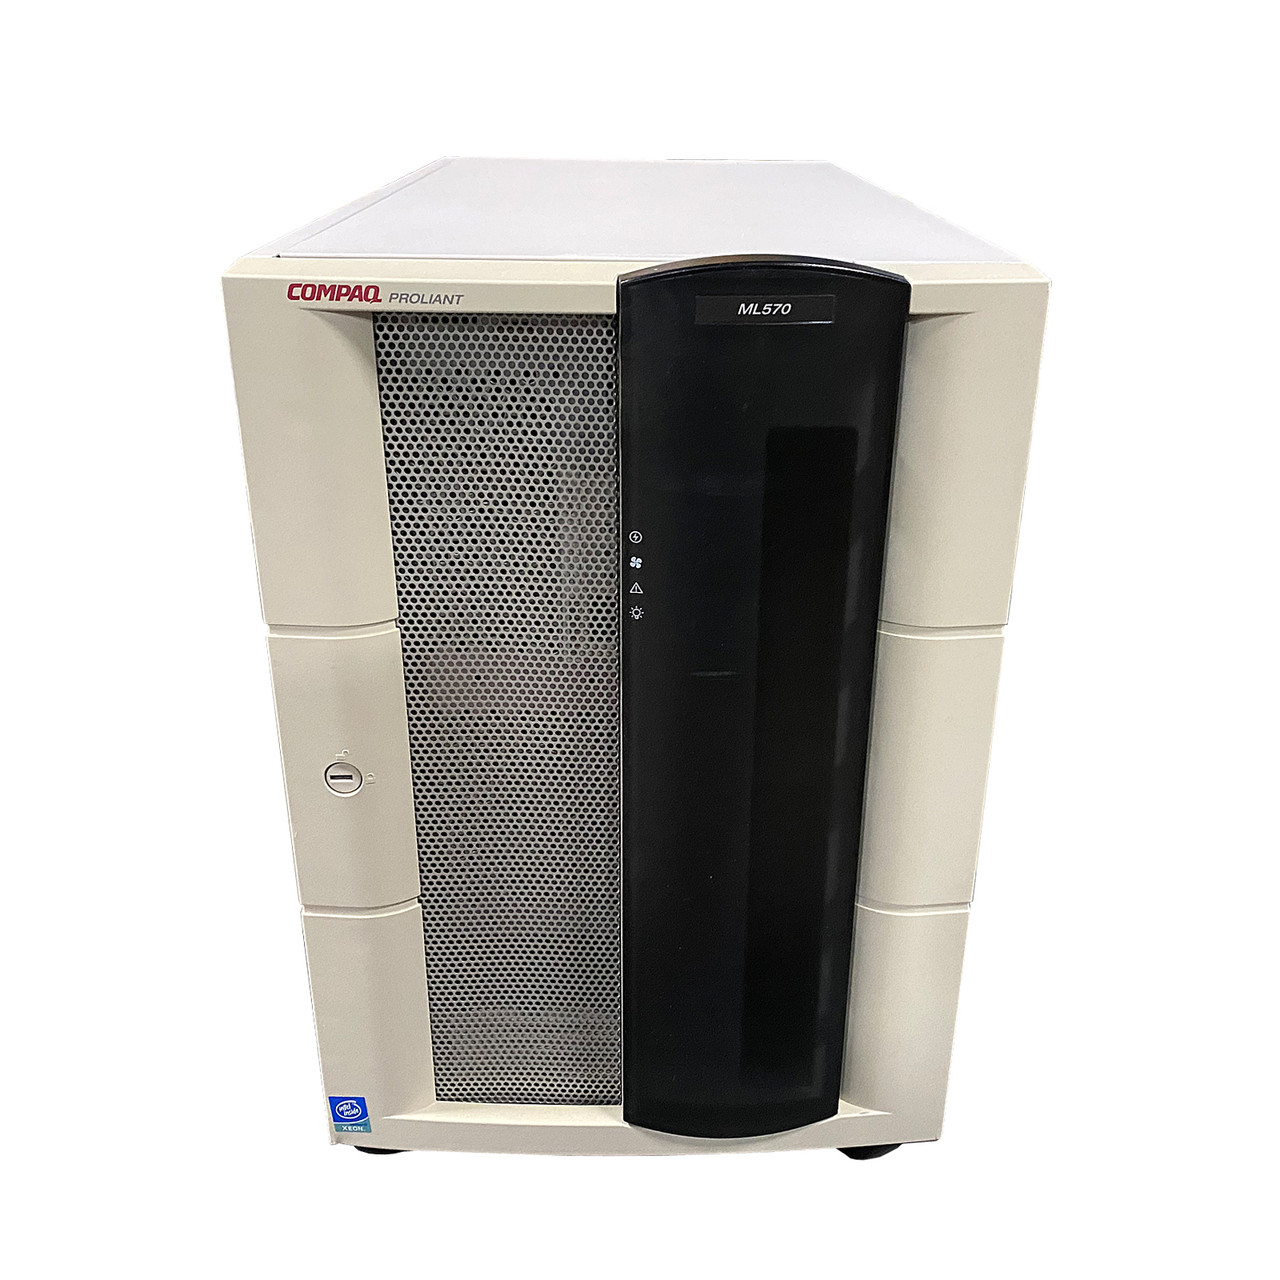 Refurbished Proliant ML570T Configure to Order Tower Server